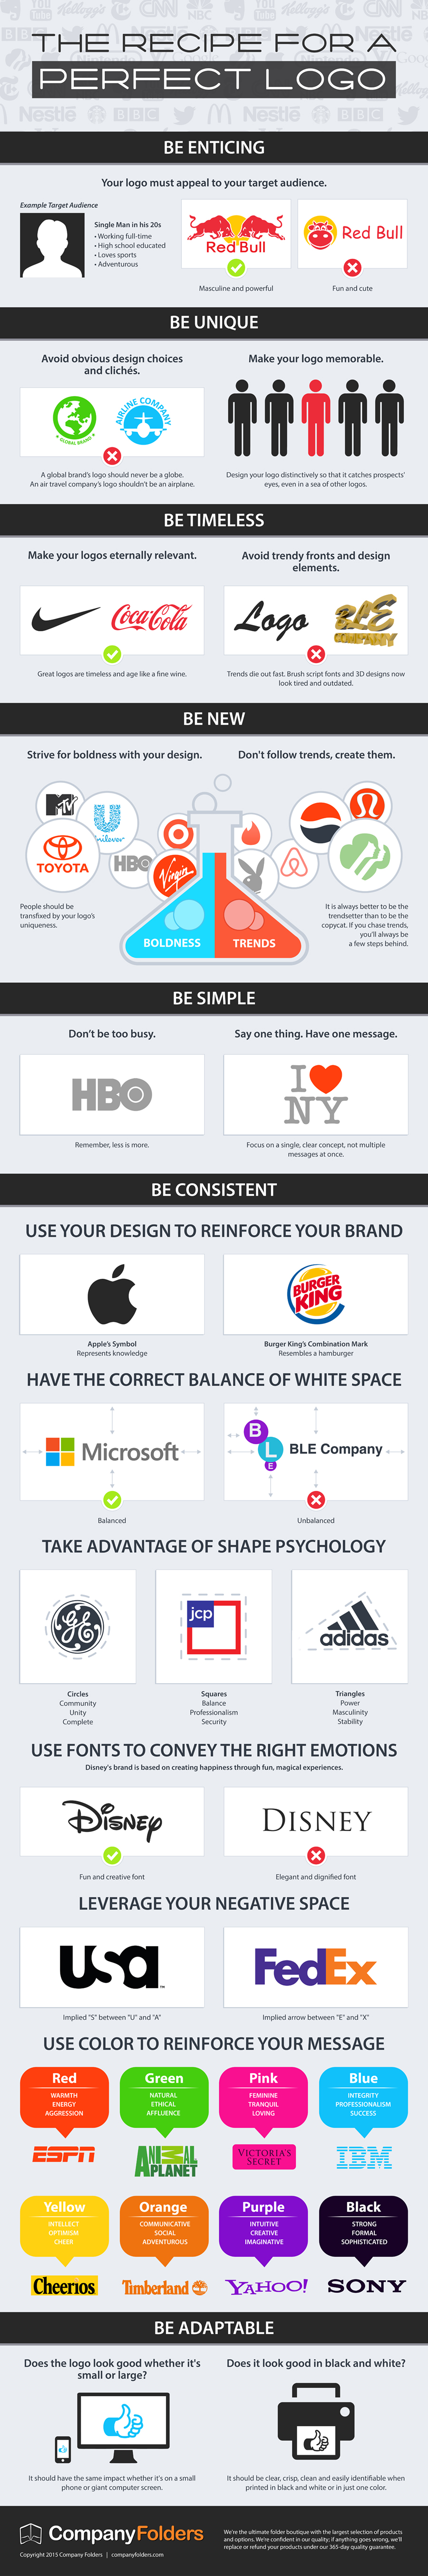 The Perfect Logo Design for Business